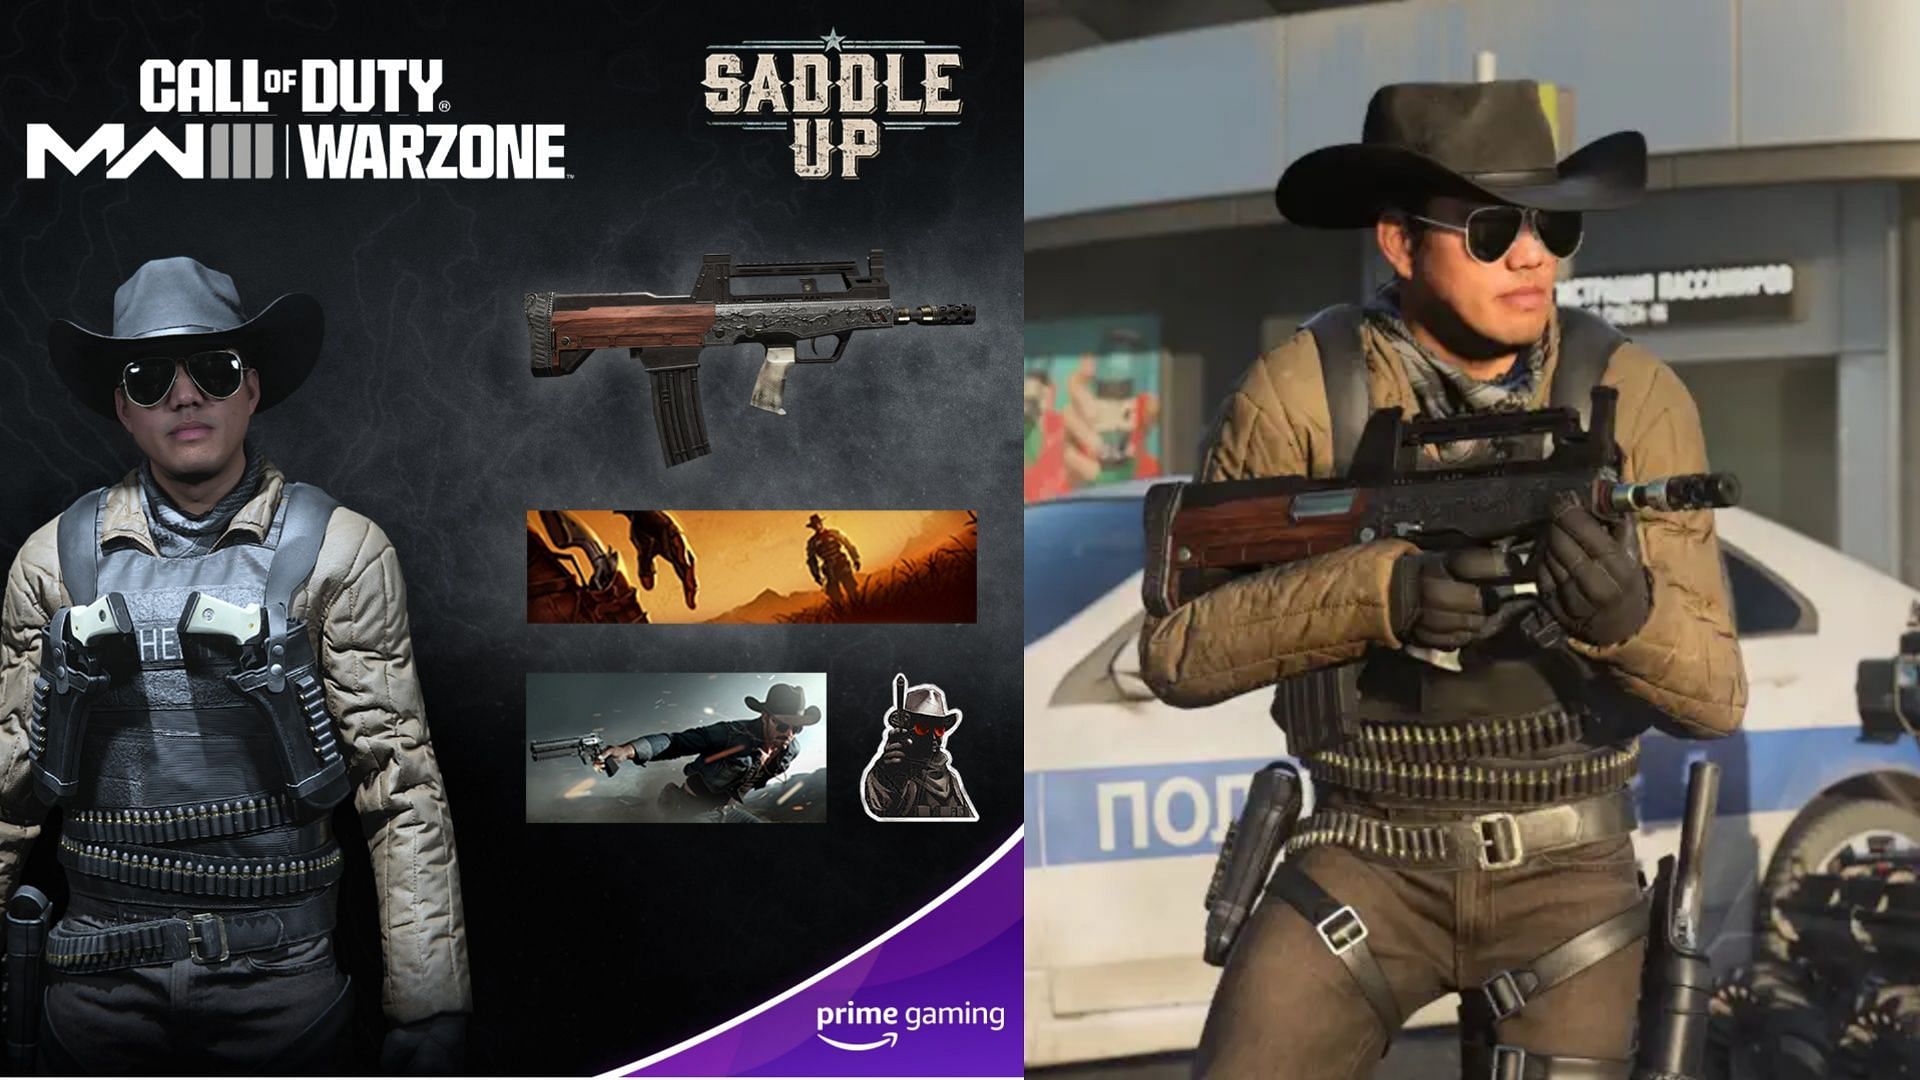 Free Saddle Up bundle in MW3 and Warzone (Image via Activision || Prime Gaming)